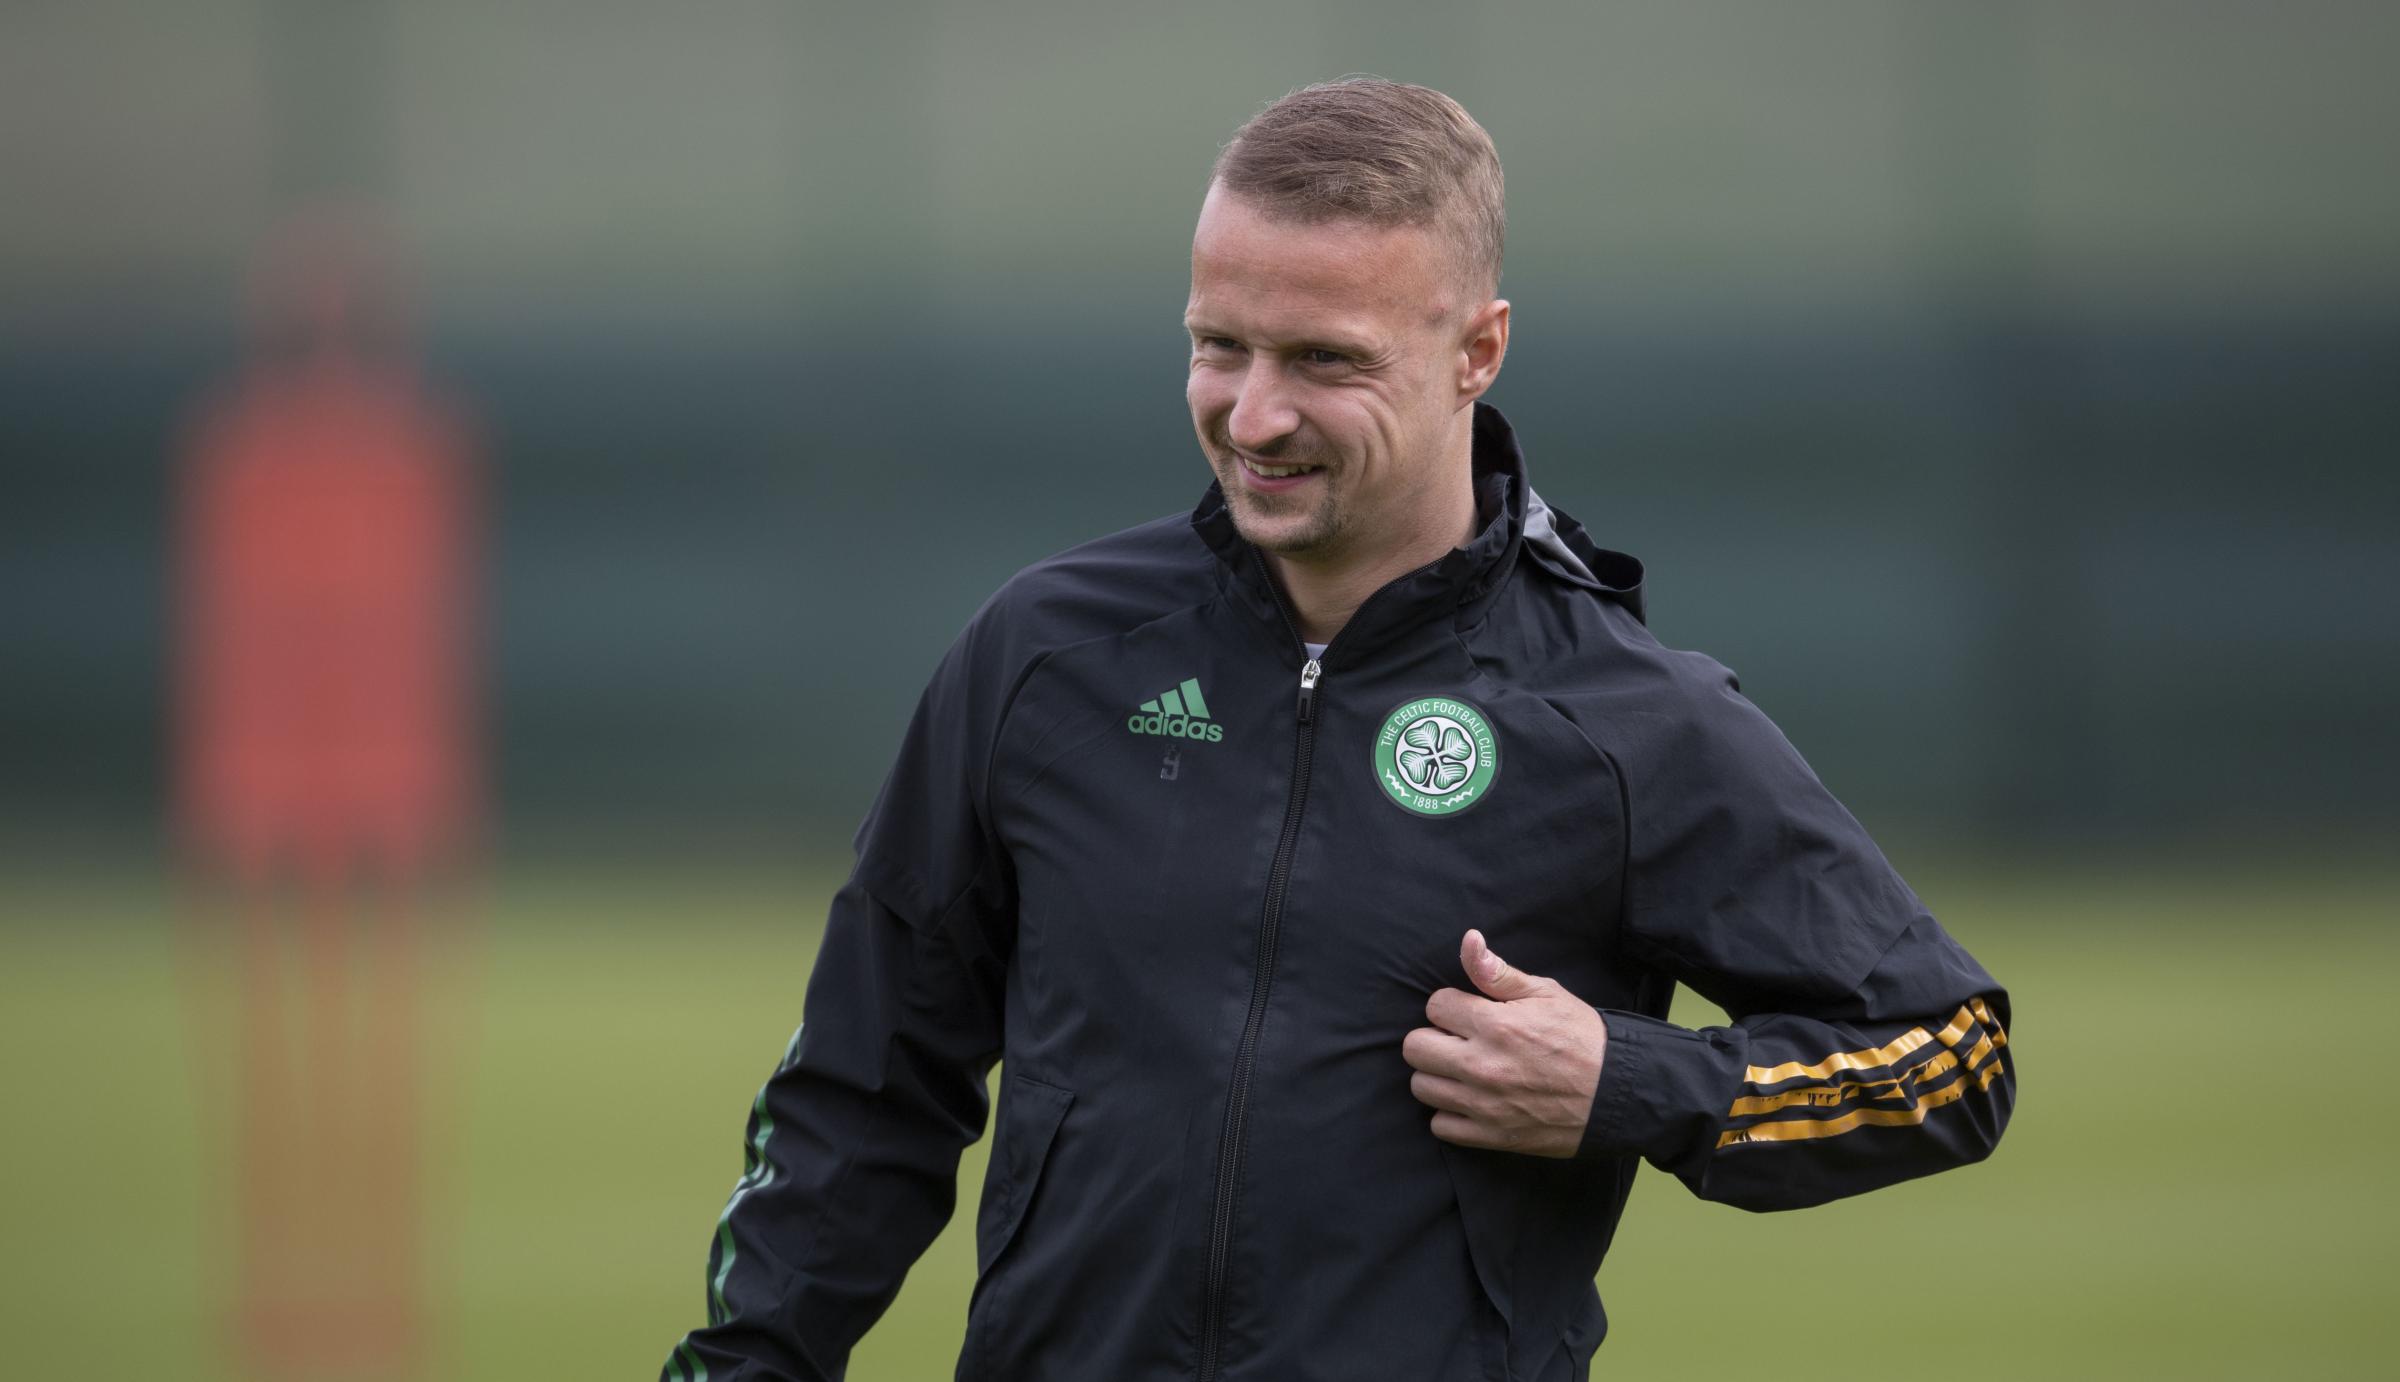 Leigh Griffiths leaves Celtic training camp as club launch probe into inappropriate message claims